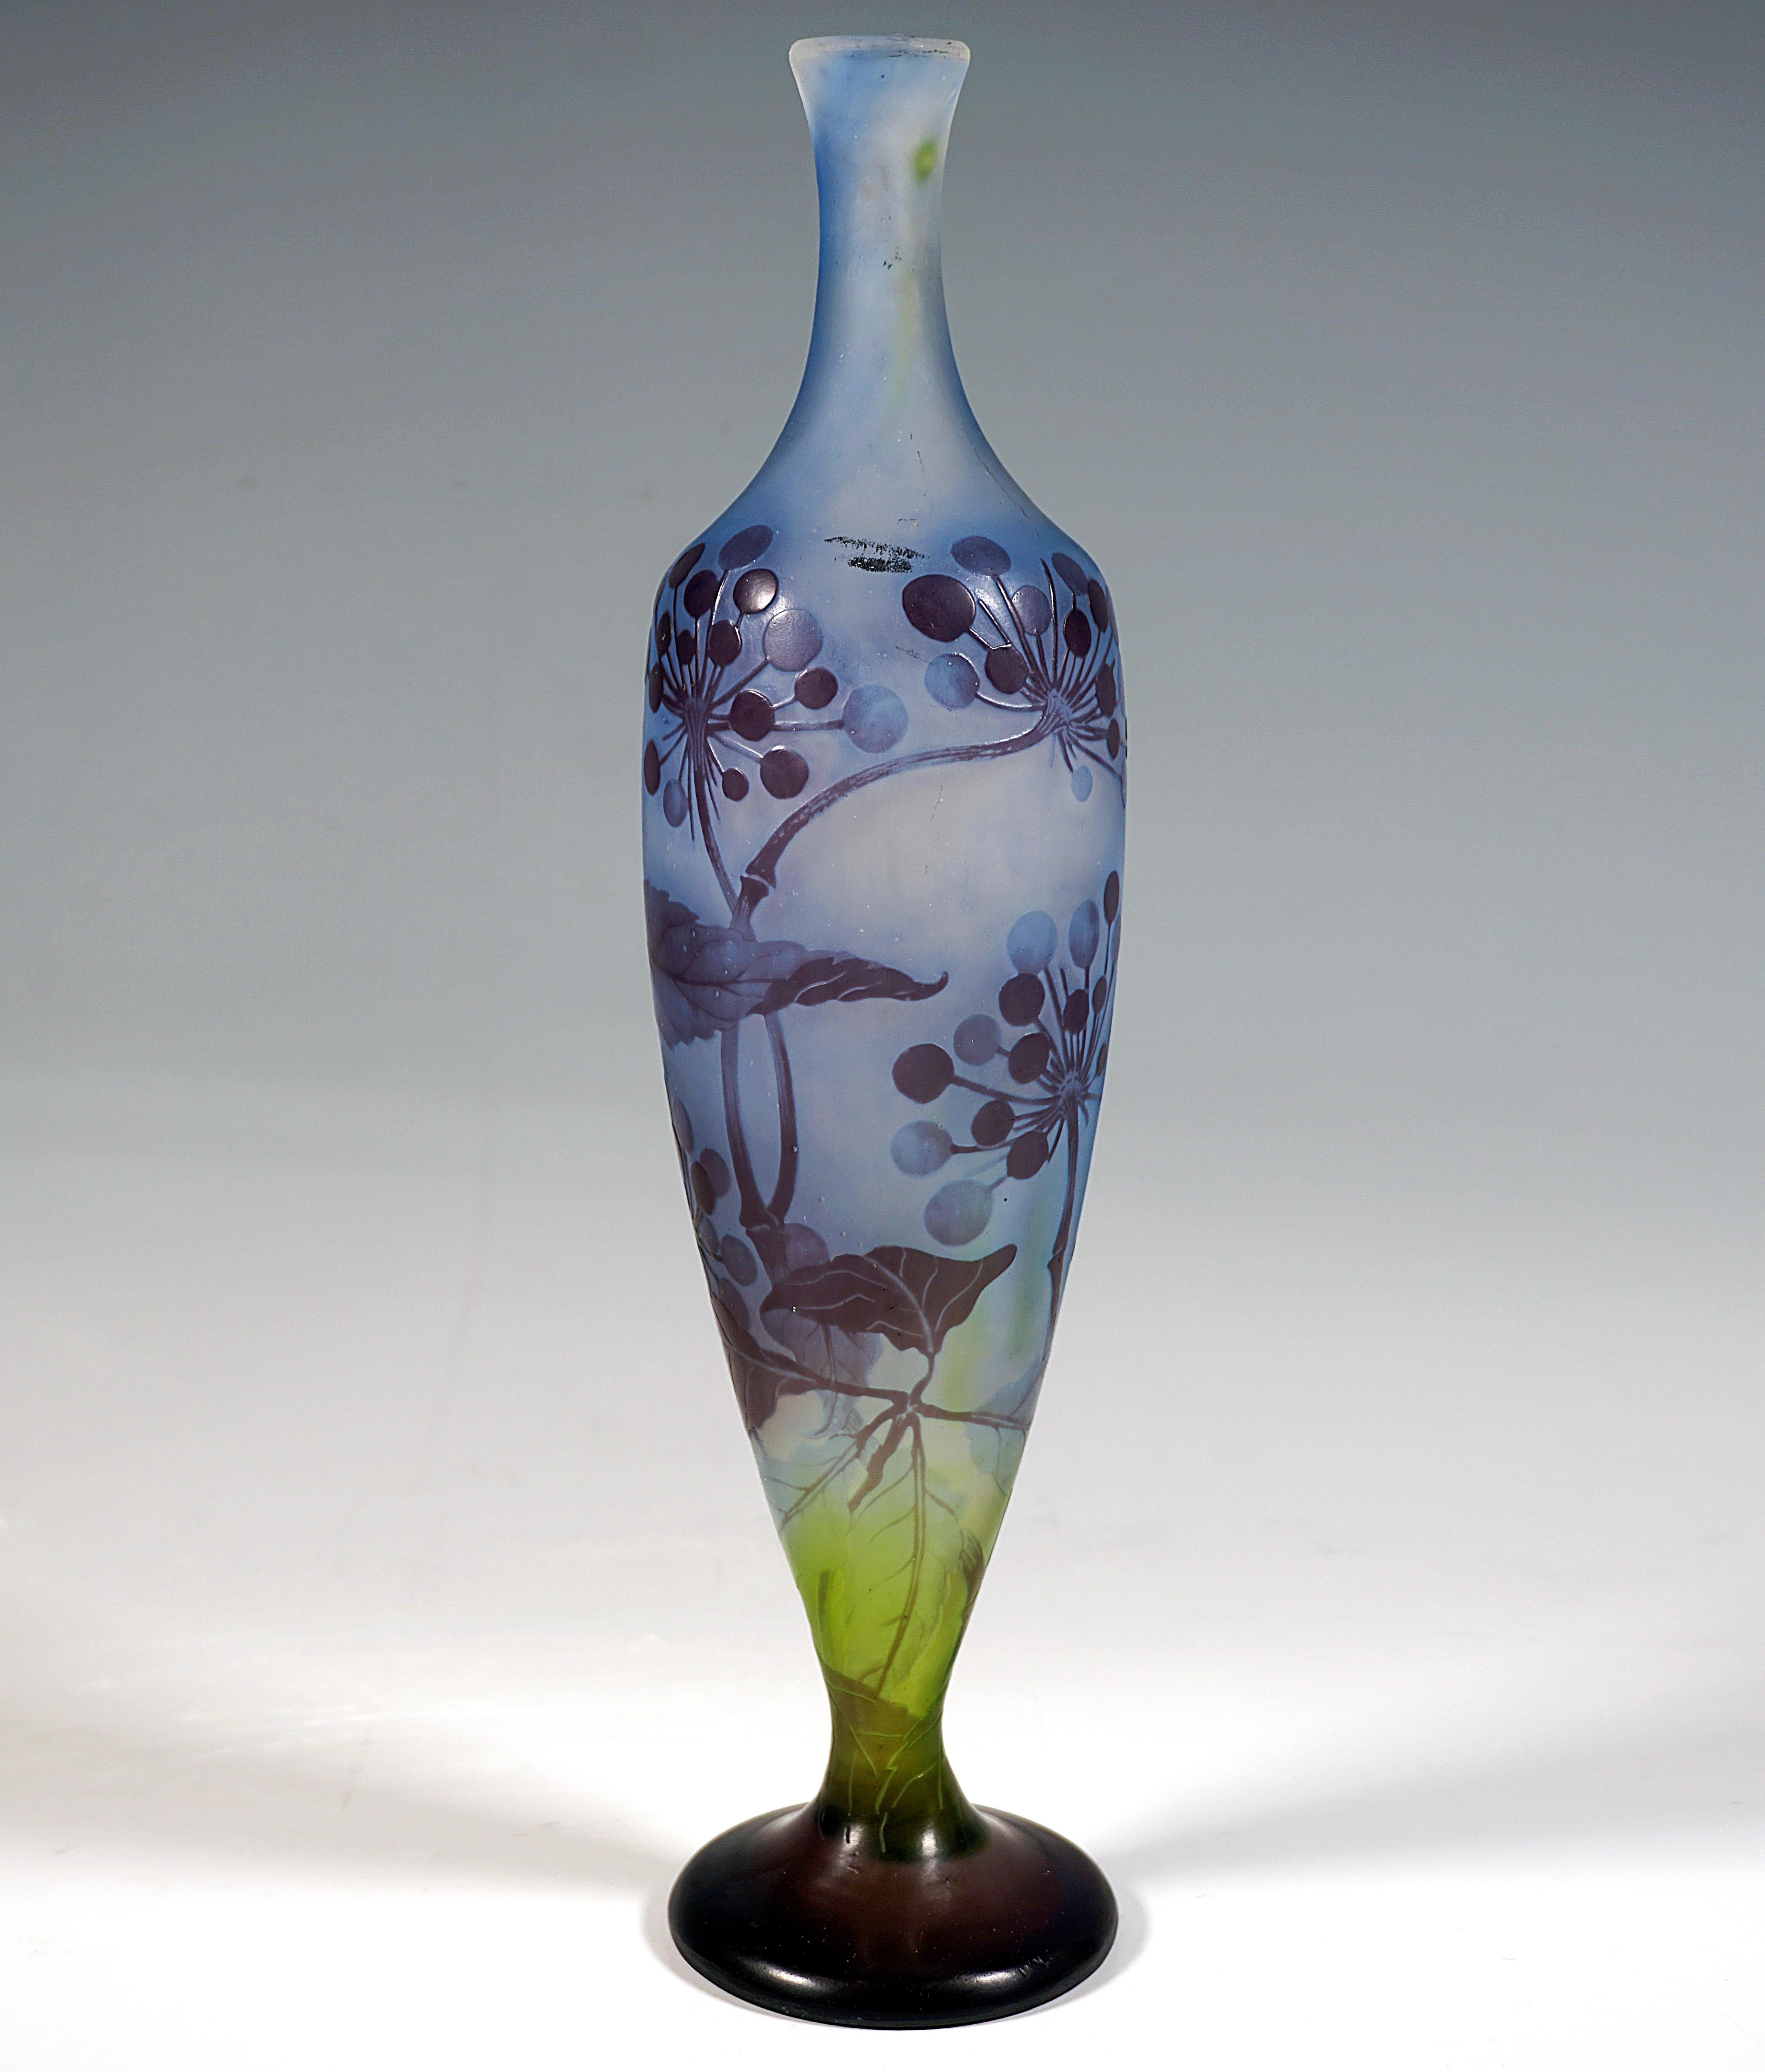 Slender baluster-shaped vase body on a separate base, conically widening upwards and then narrowing again to form a slender neck with a flared rim, colorless glass with blue and green colored powder inclusions, overlay in violet, in various stages